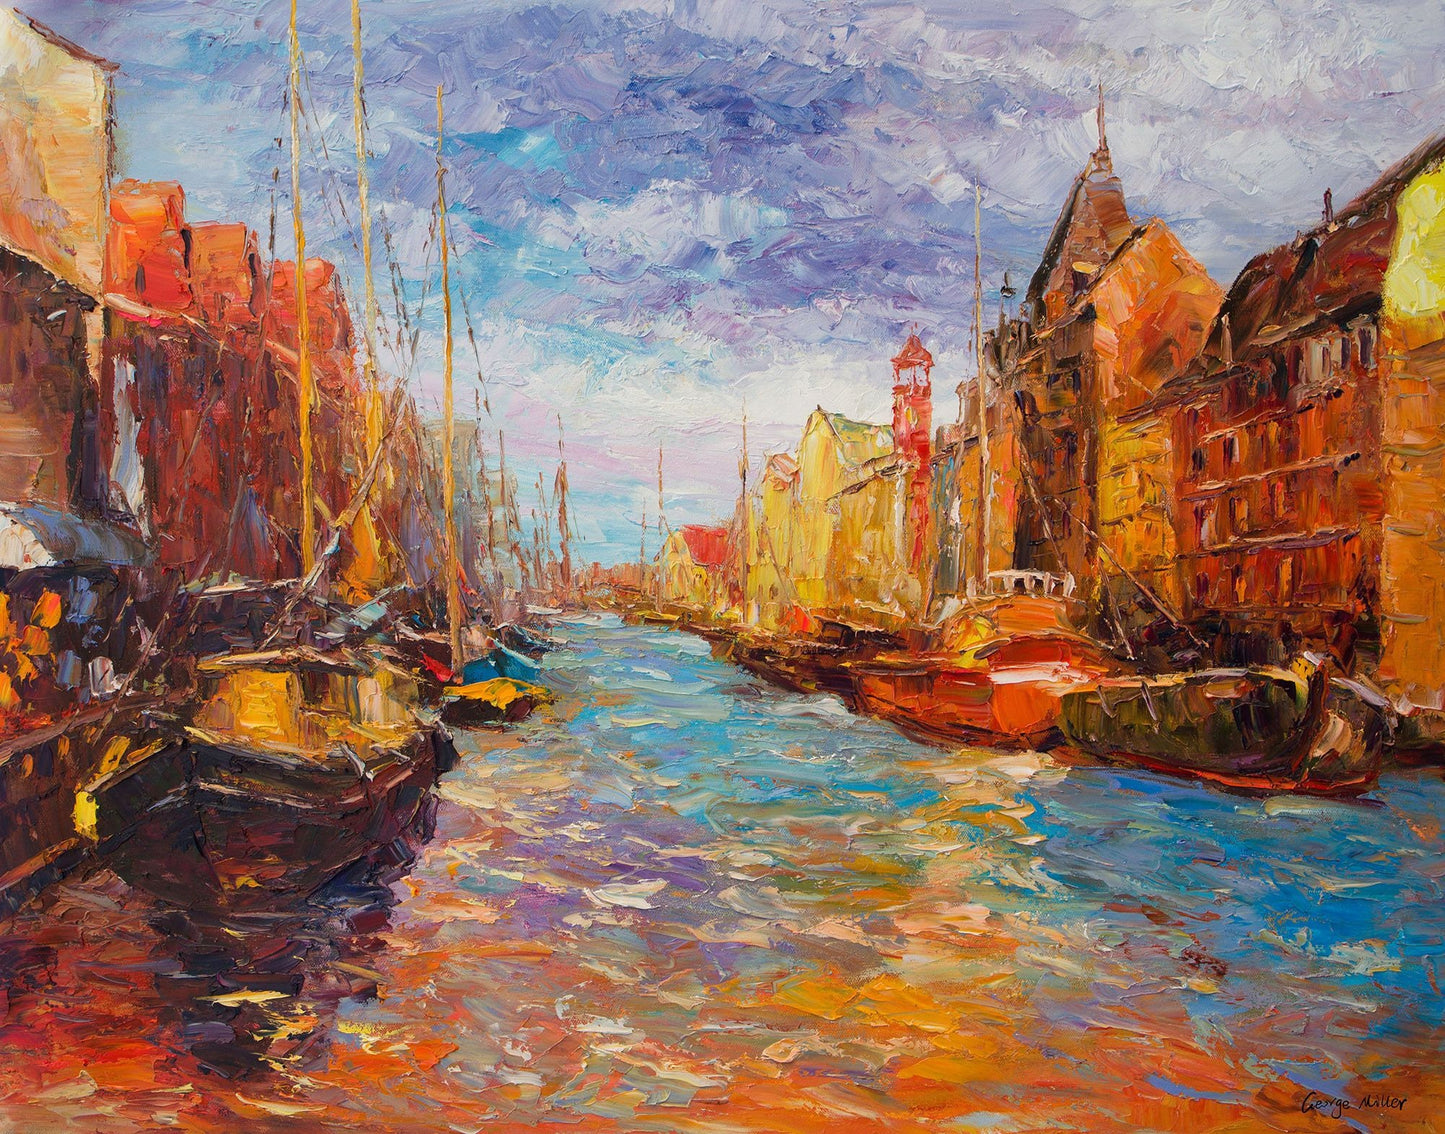 Oil Painting Amsterdam Canal Boats, Abstract Painting, Canvas Painting, Contemporary Art, Living Room Decor, Large Landscape Painting